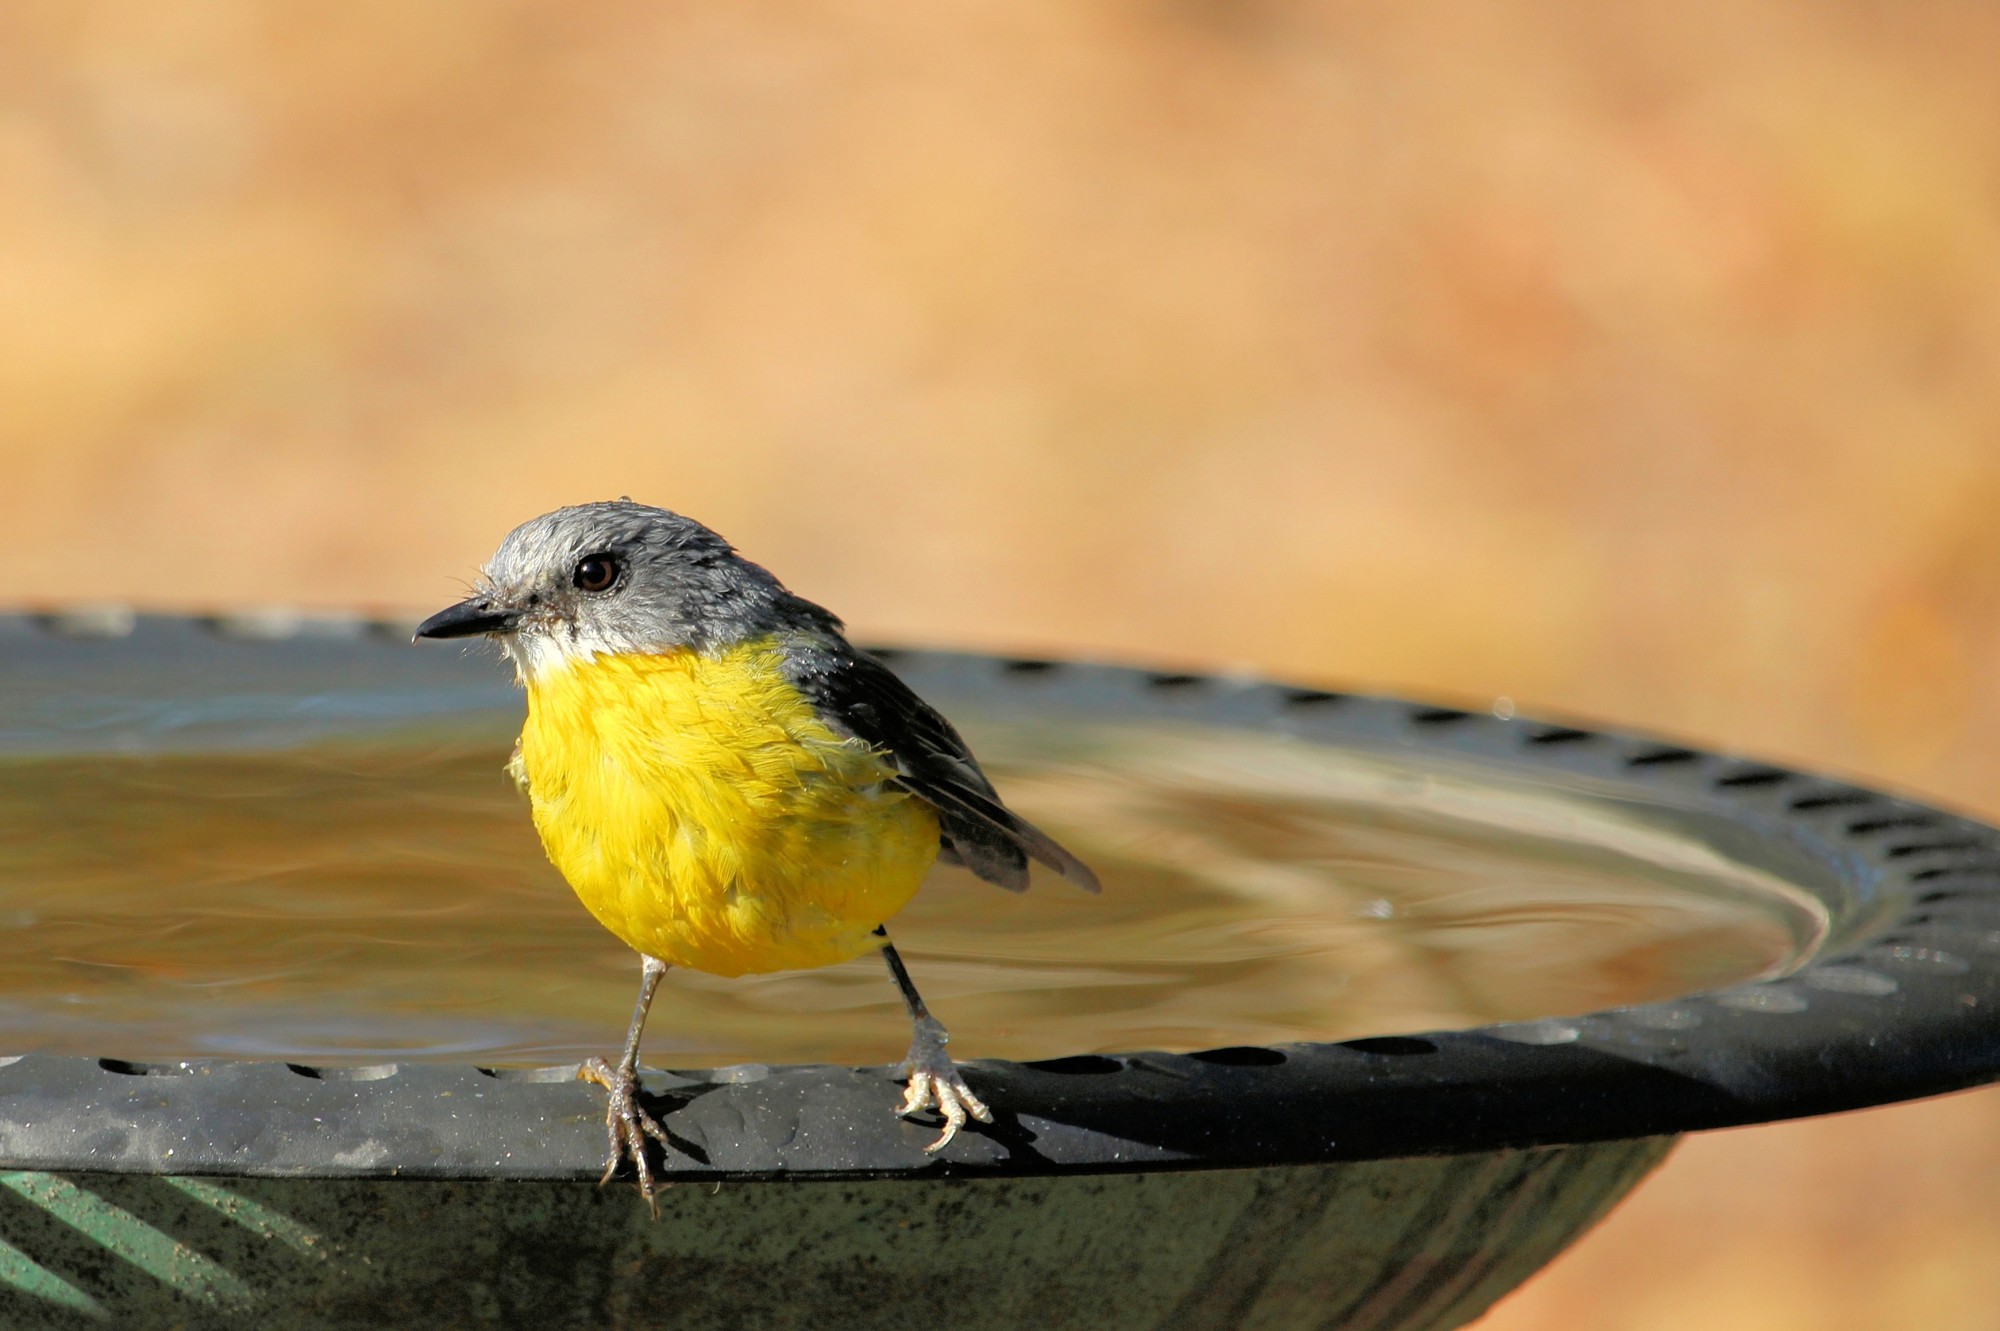 Making your yard welcoming is the key to attracting birds. Read on to discover the complete guide to attracting birds to your yard here.